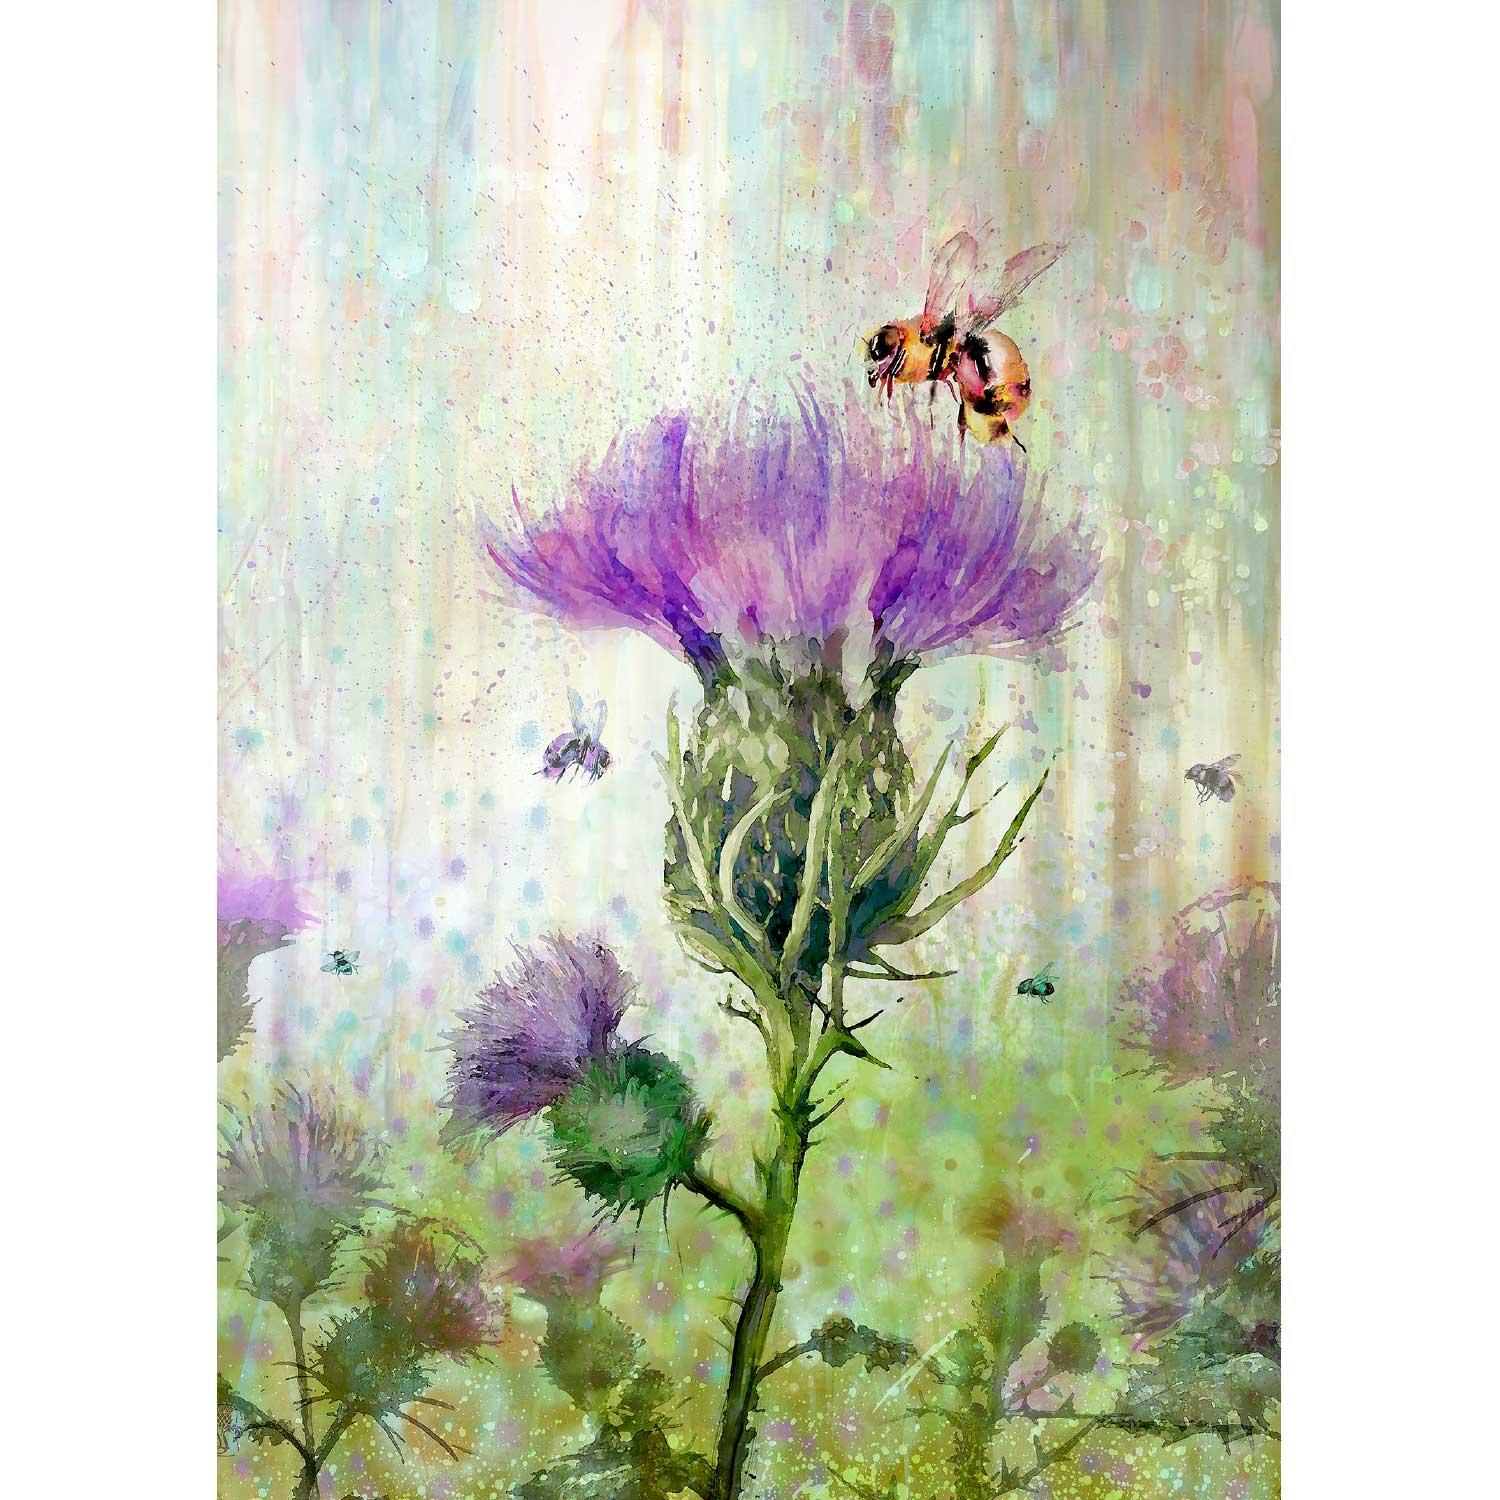 Thistle by artist Lee Scammacca